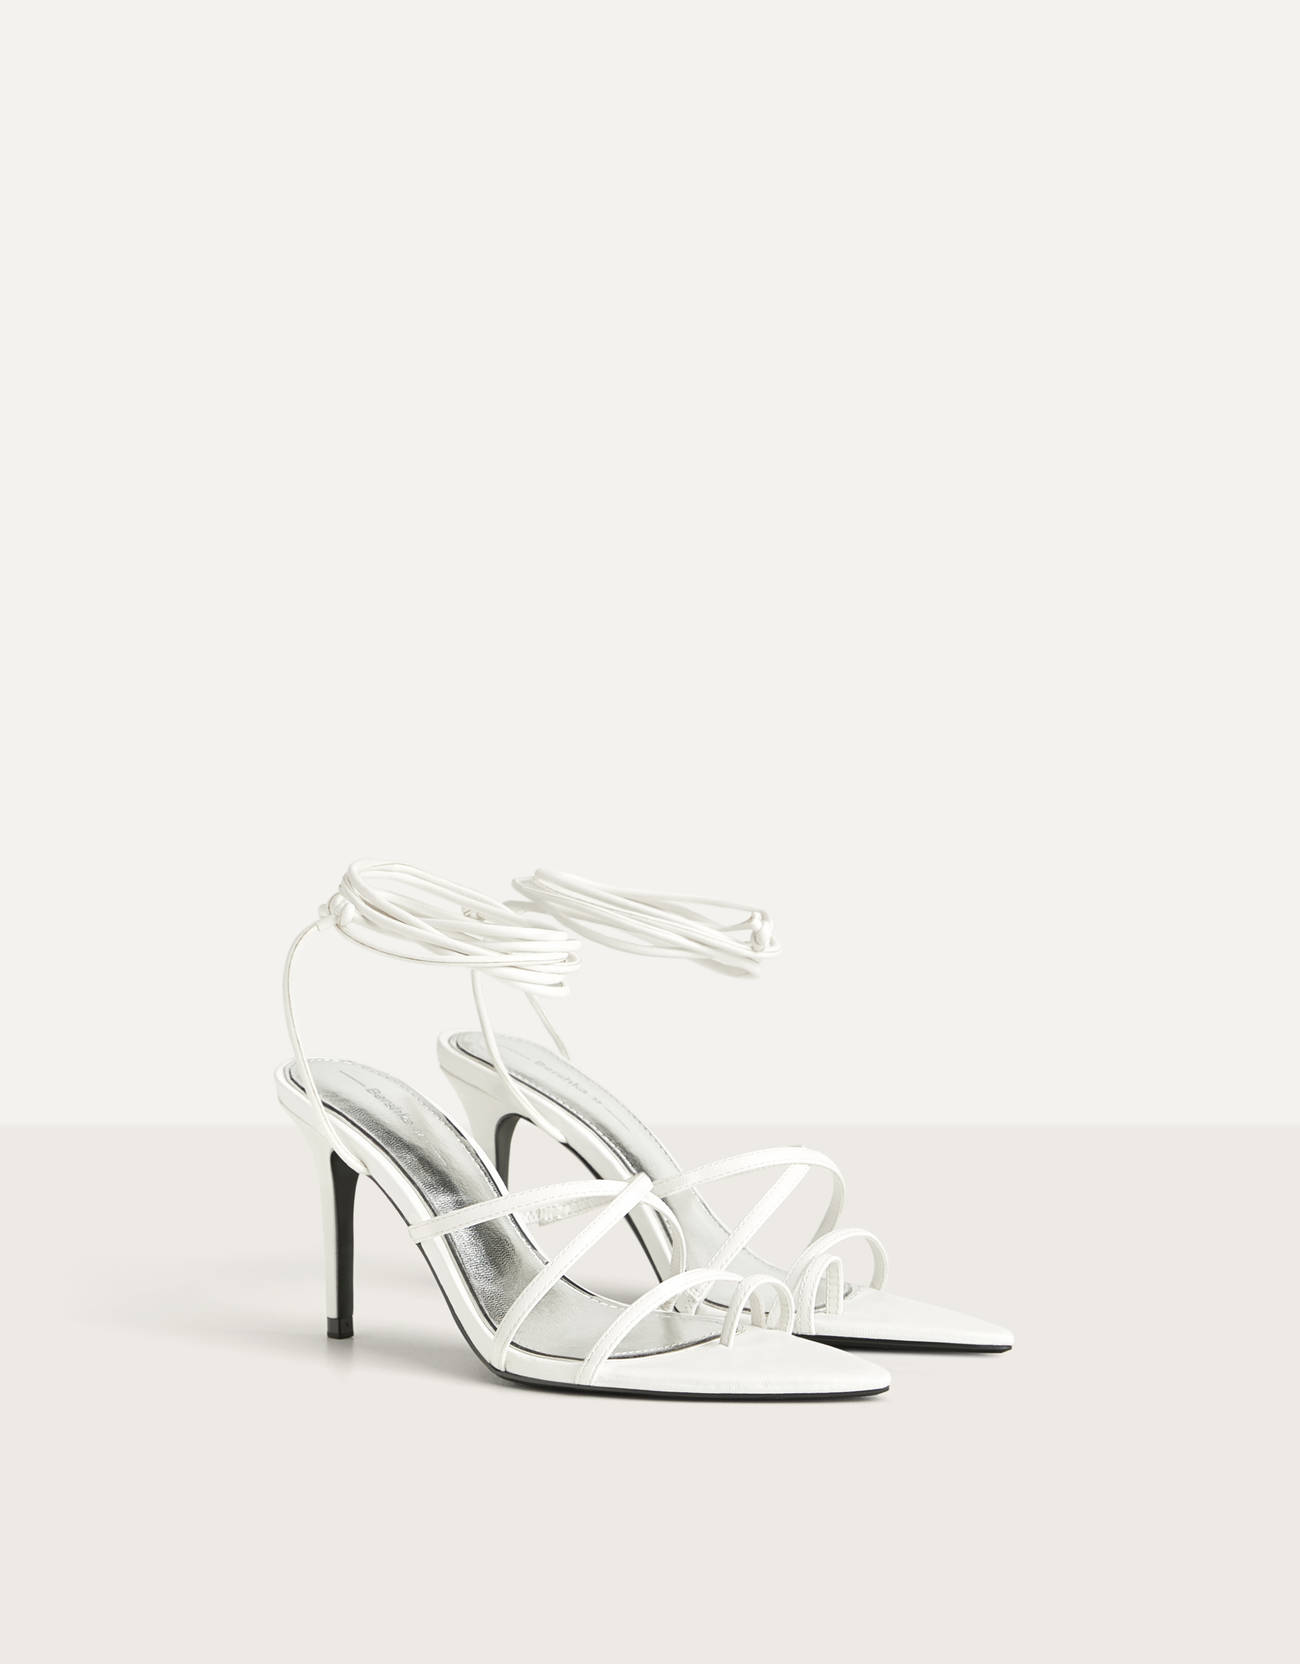 Abundantly Thrust above High-heel sandals with straps and tie detail - null - Bershka Luxembourg